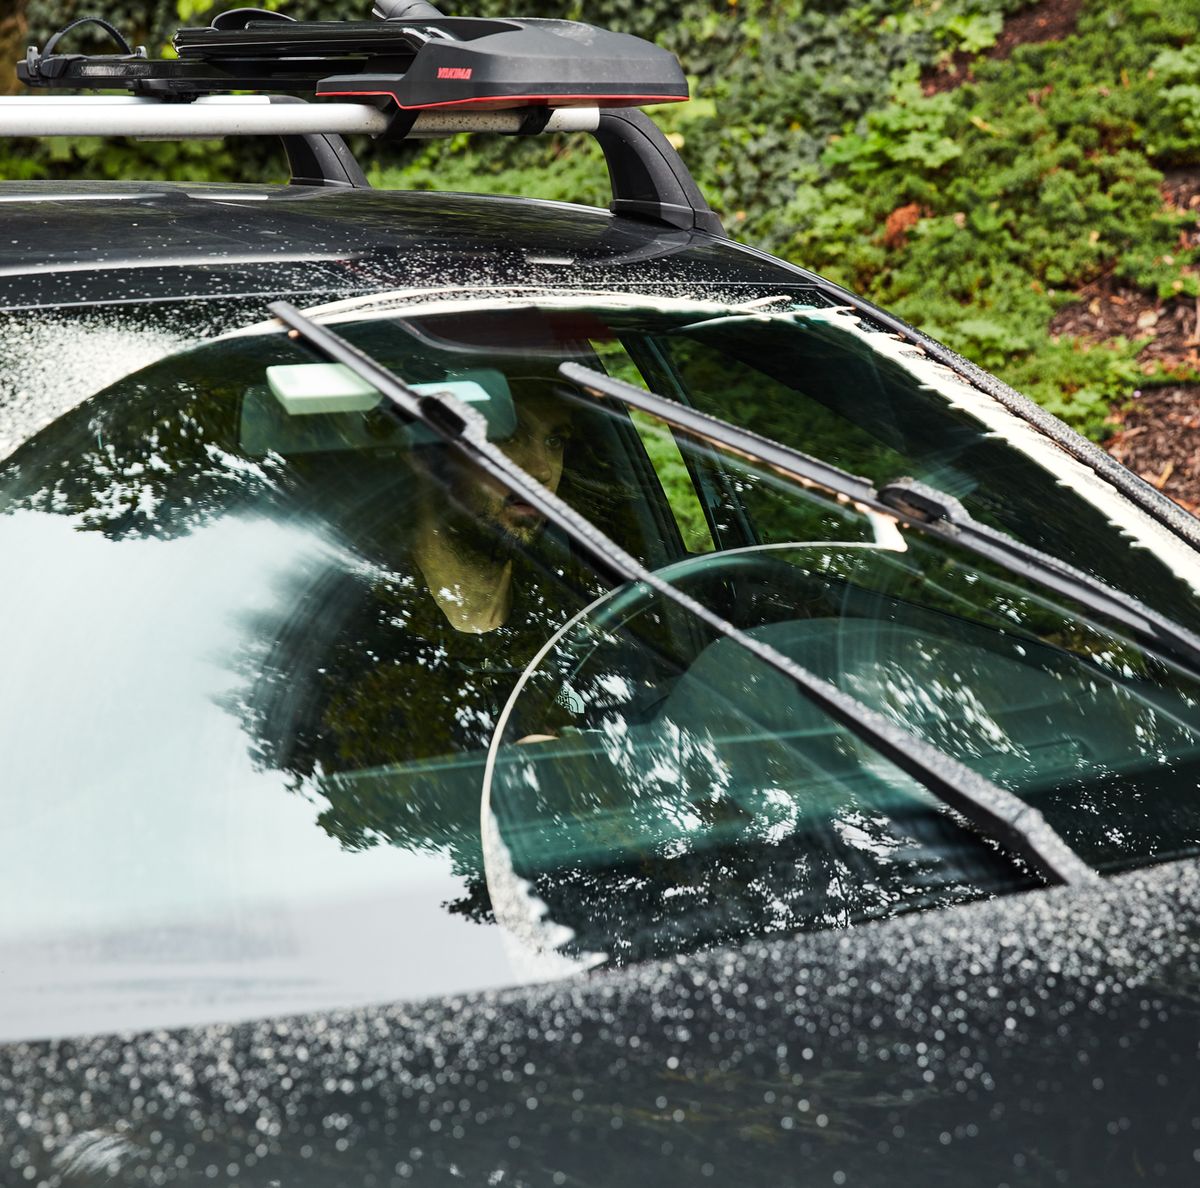 Wiper blades: Everything you ever wanted to know